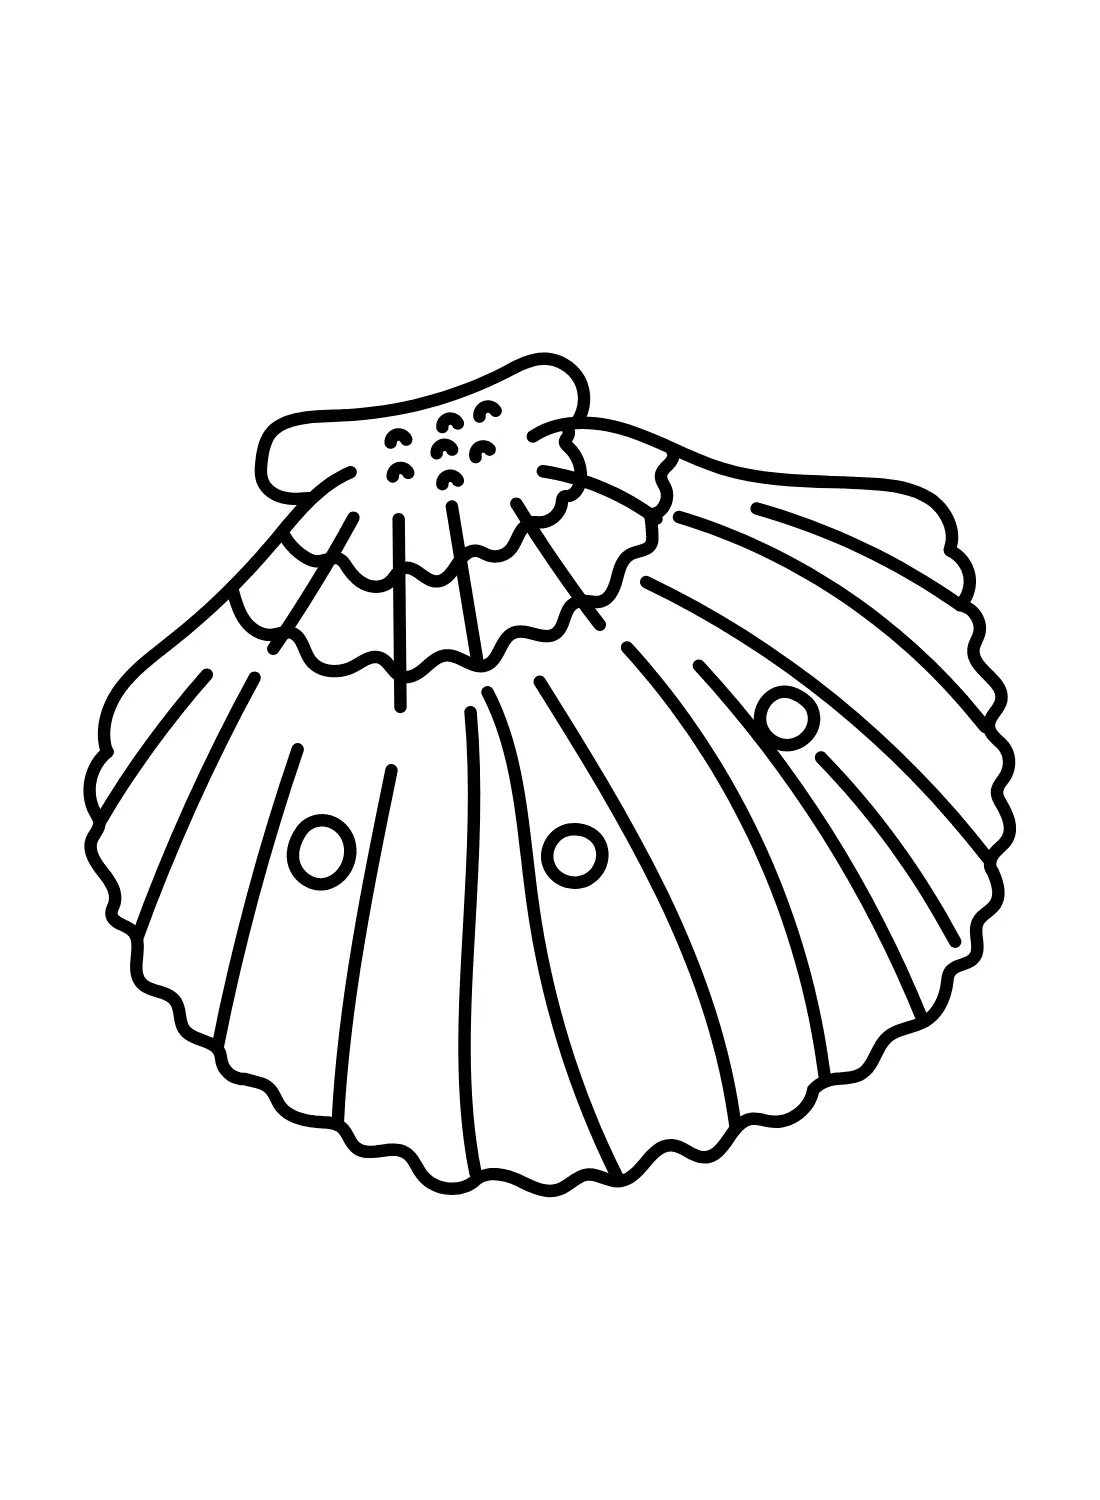 Scallop Coloring Pages